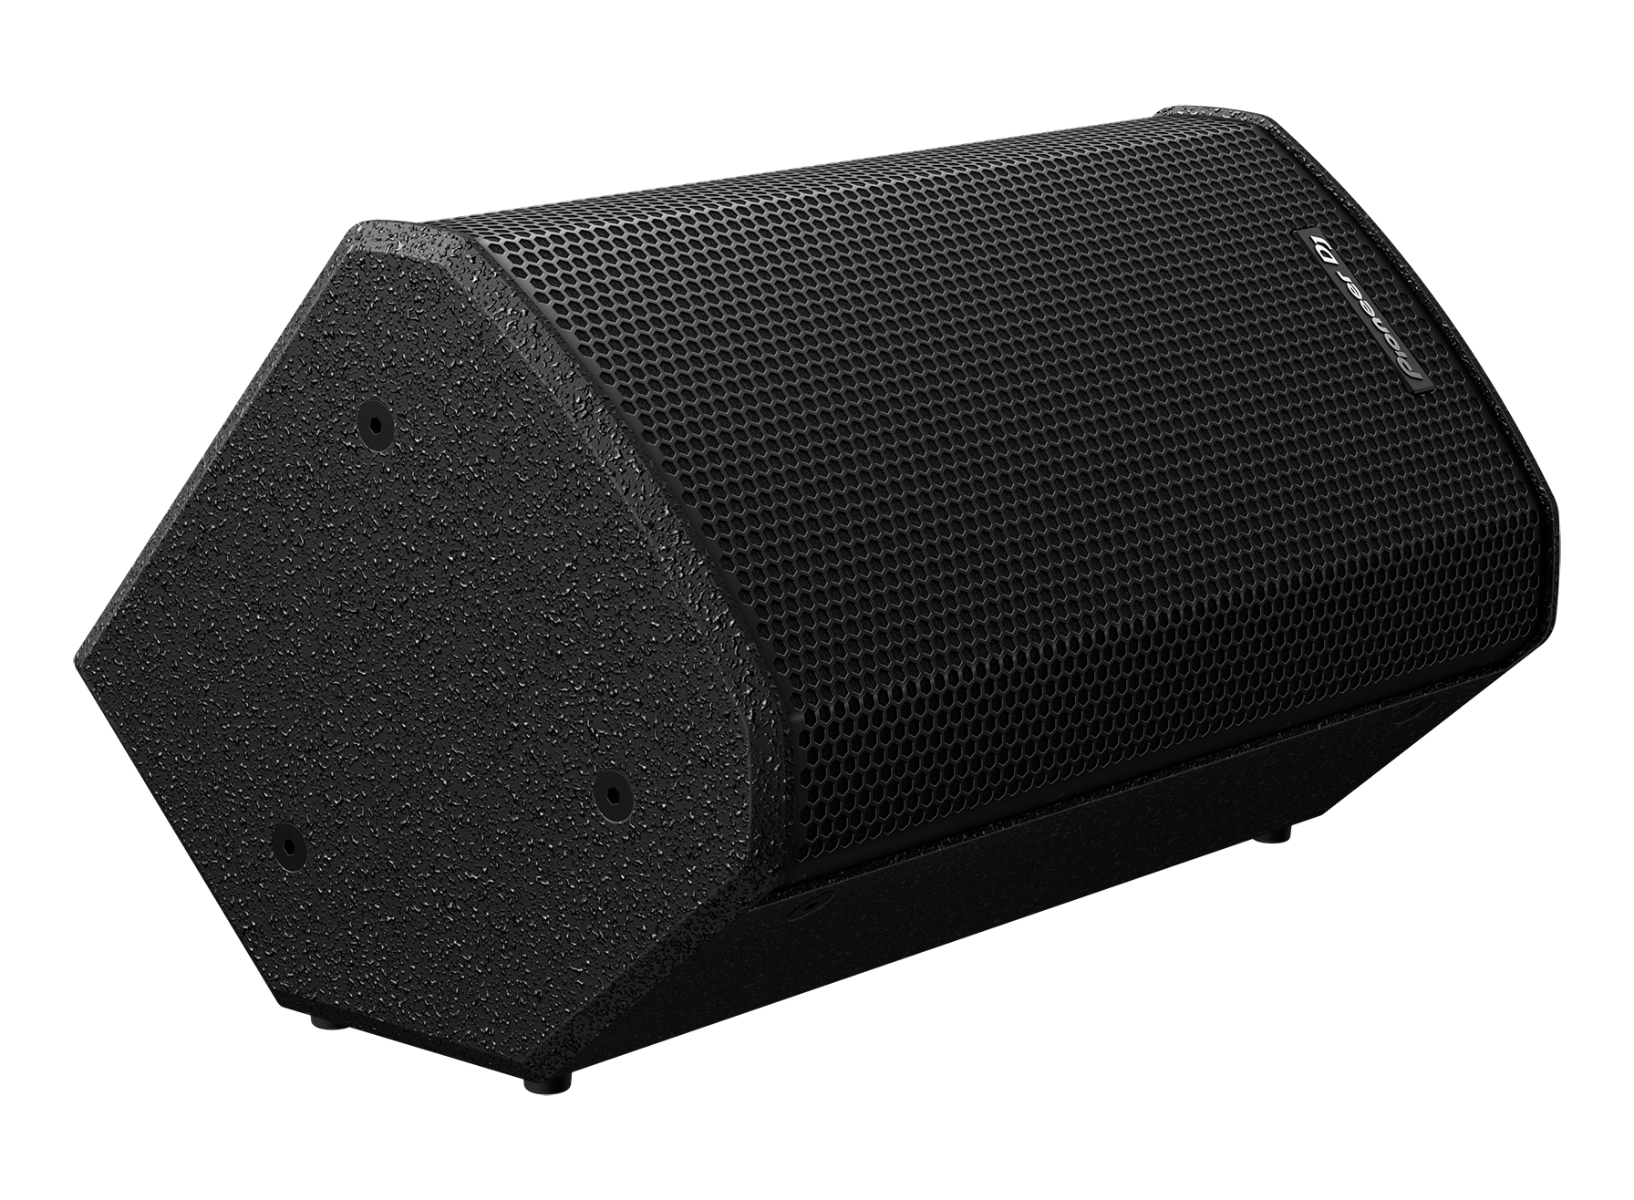 Pioneer XPRS102 -10” 2000W Powered Speaker with DSP